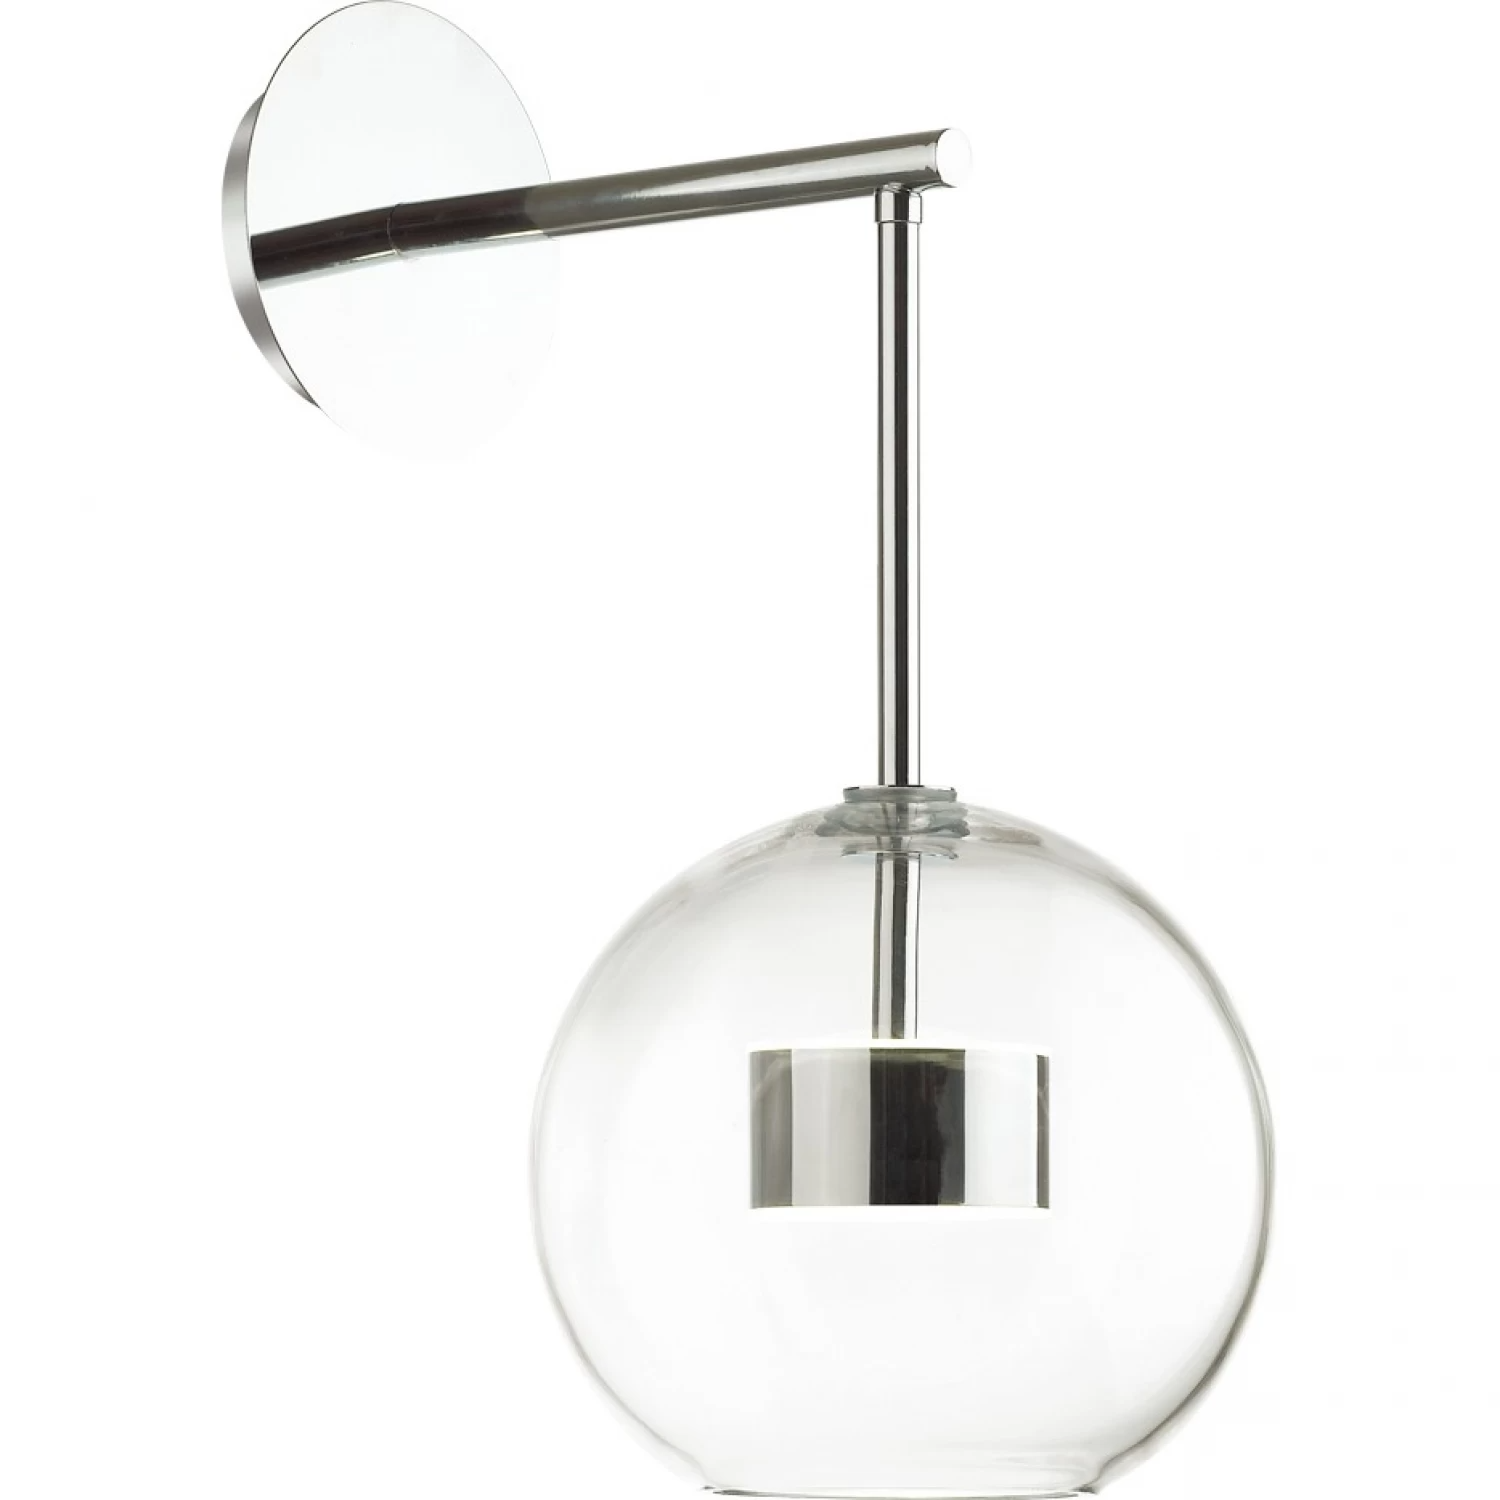 Glass Globe Wall Sconce Galvin